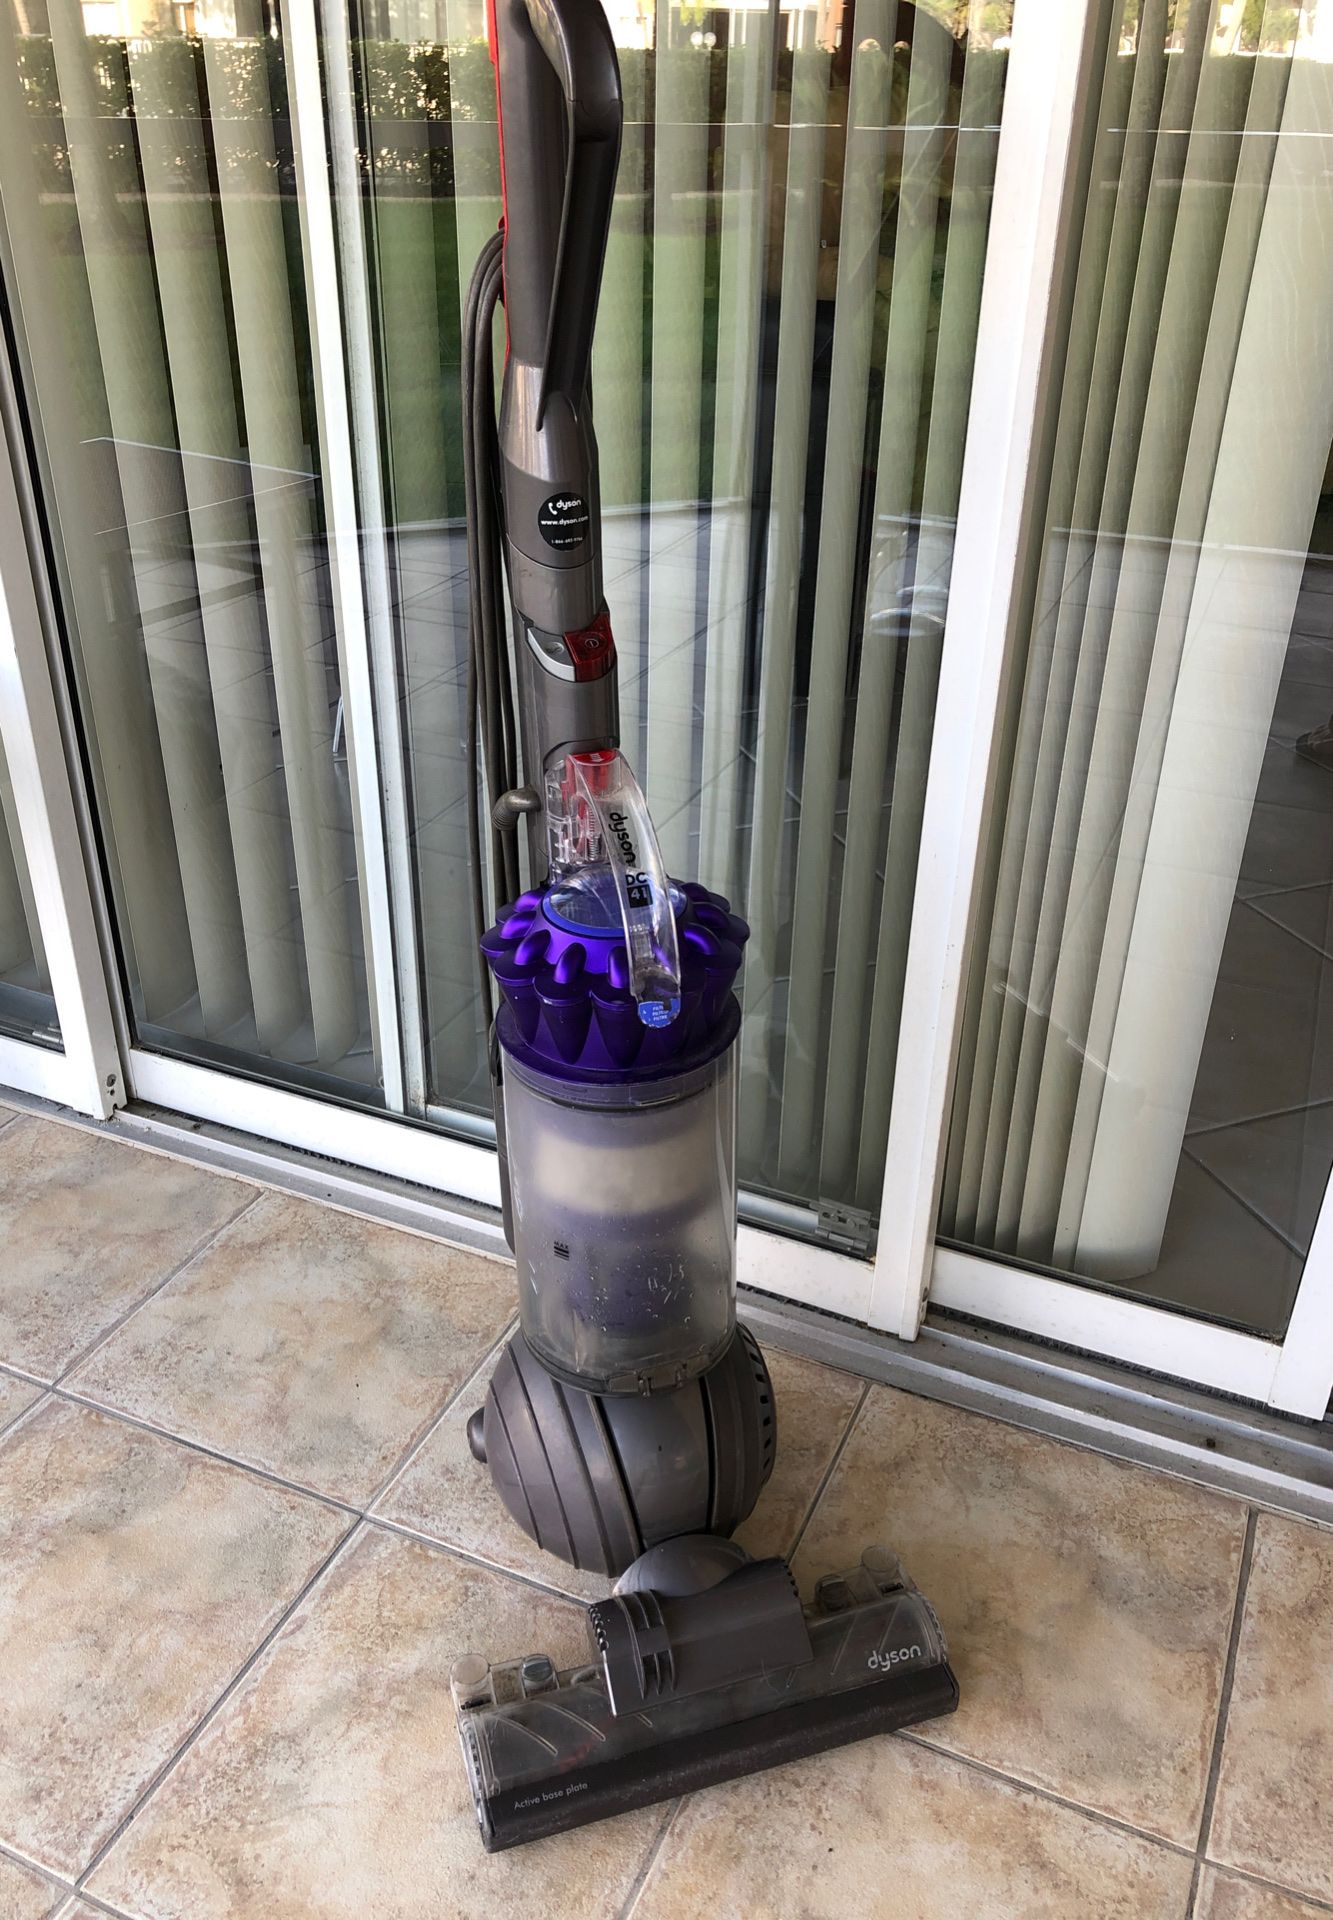 Vacuum Dyson Perfect condition was $400 new